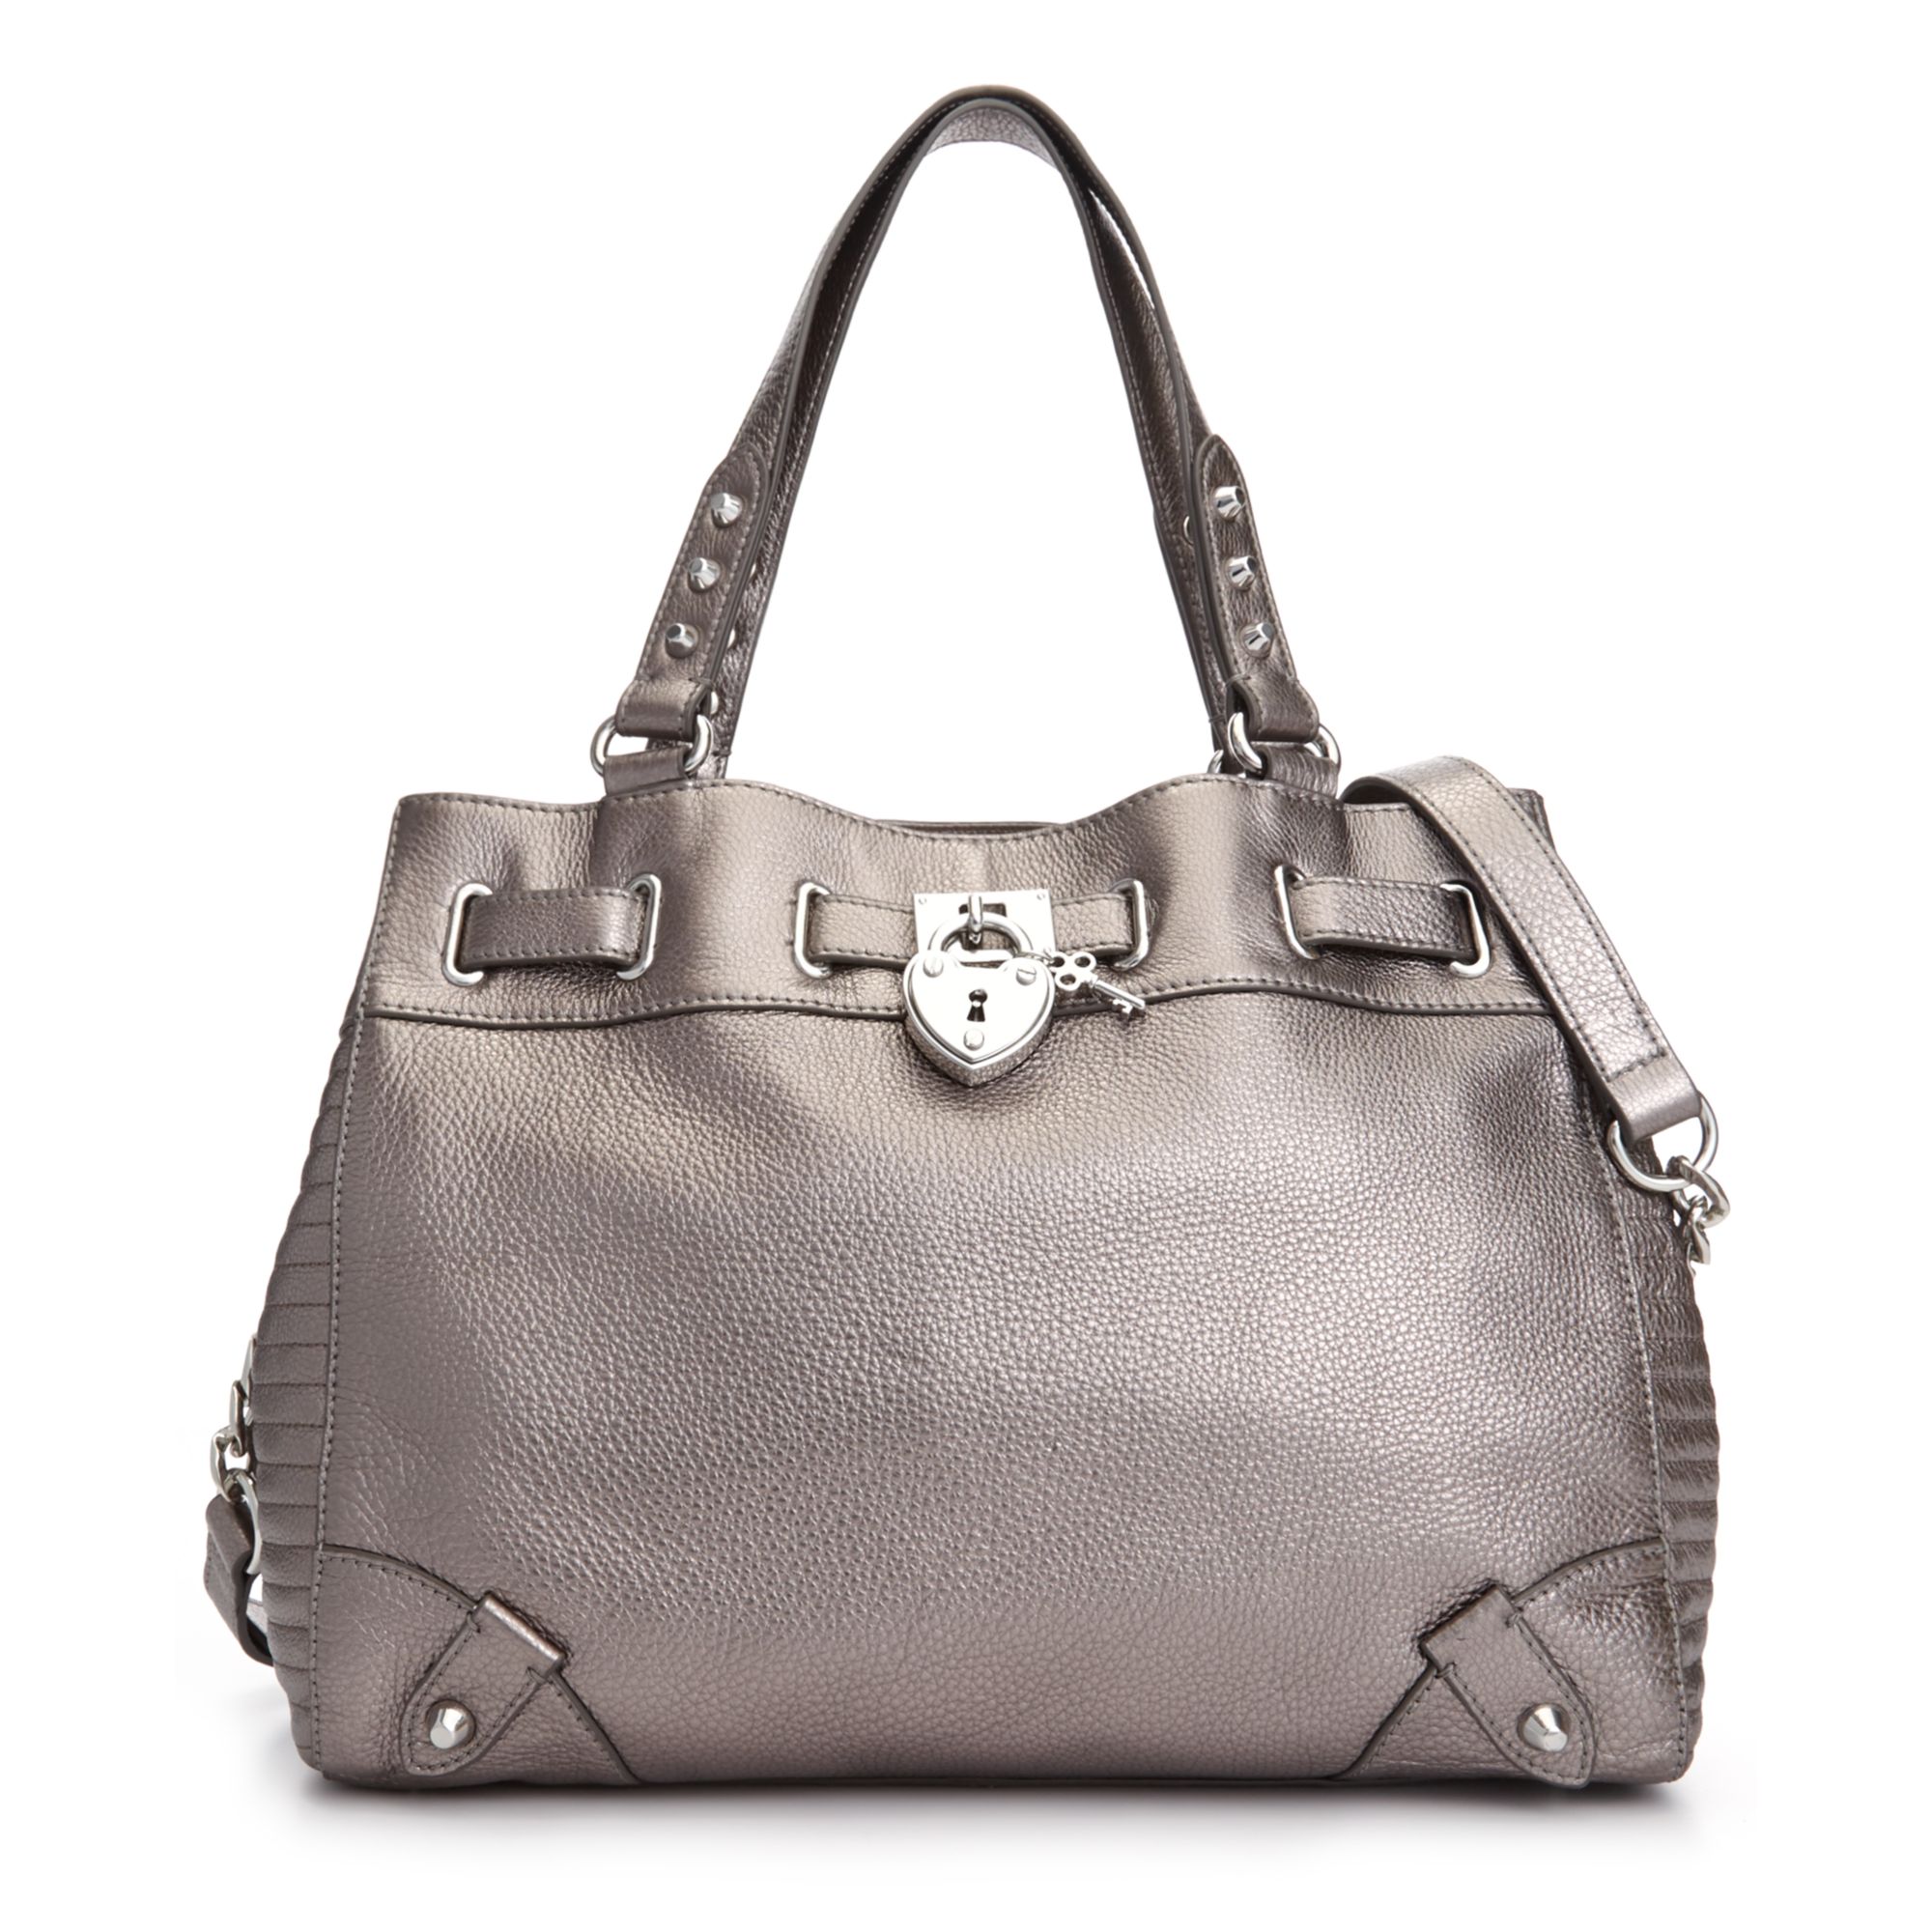 Juicy Couture Daydreamer Leather Satchel in Silver (Pewter) | Lyst